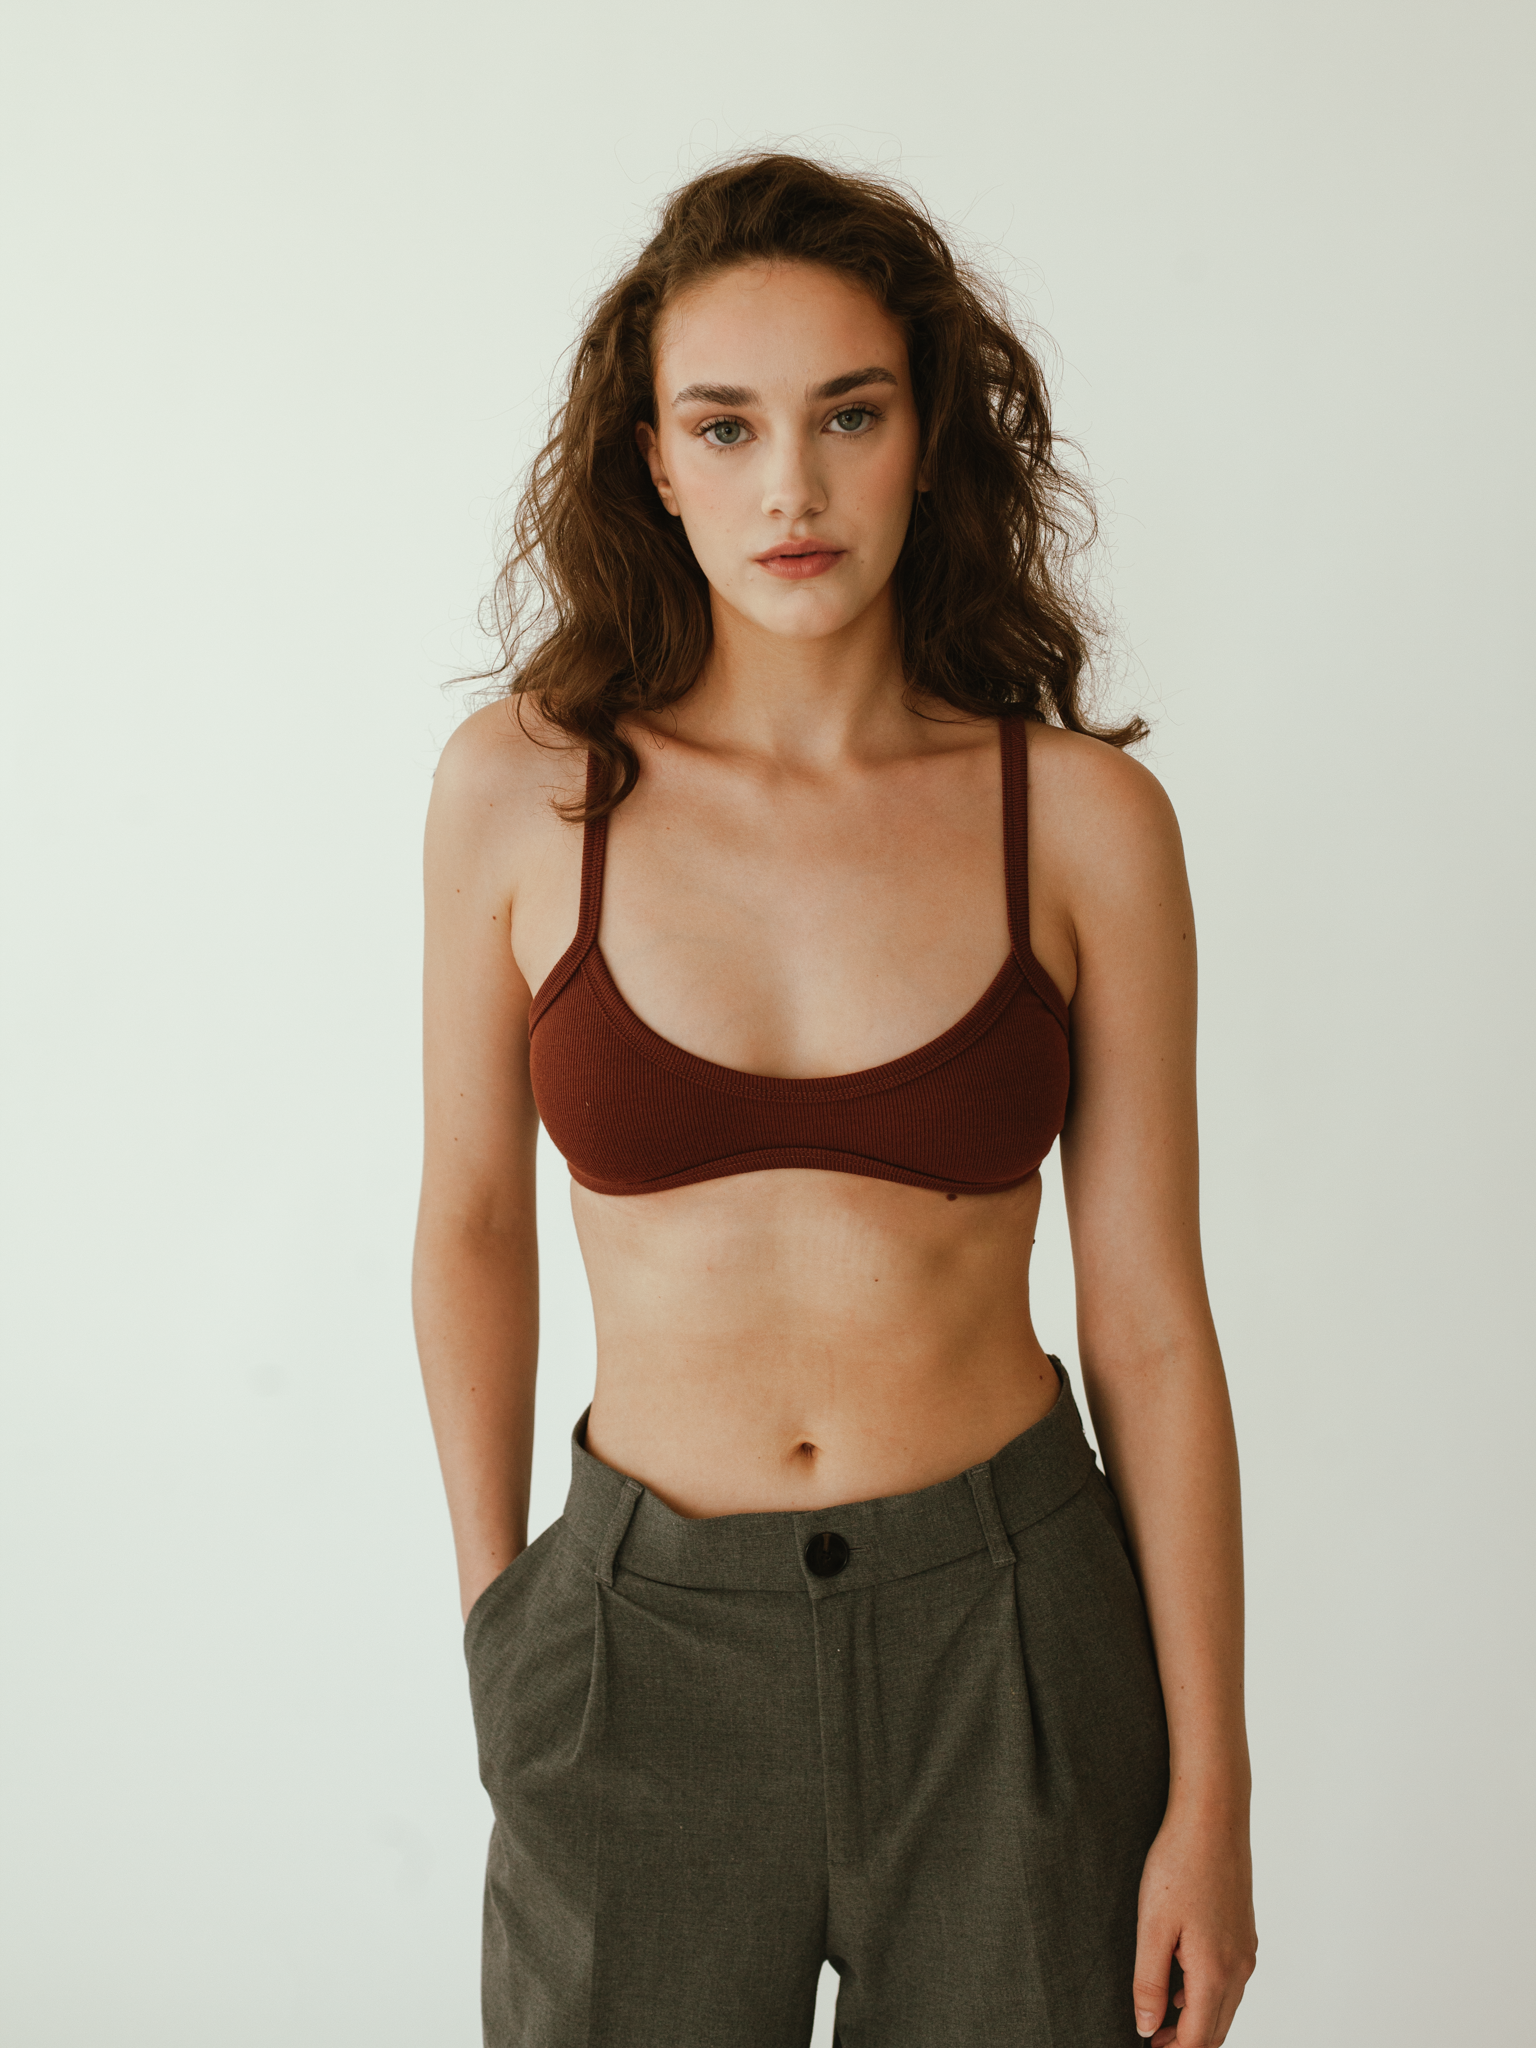 Trying To Knit A Bra In 24 Hours // The Basic Bra by Nakedknit